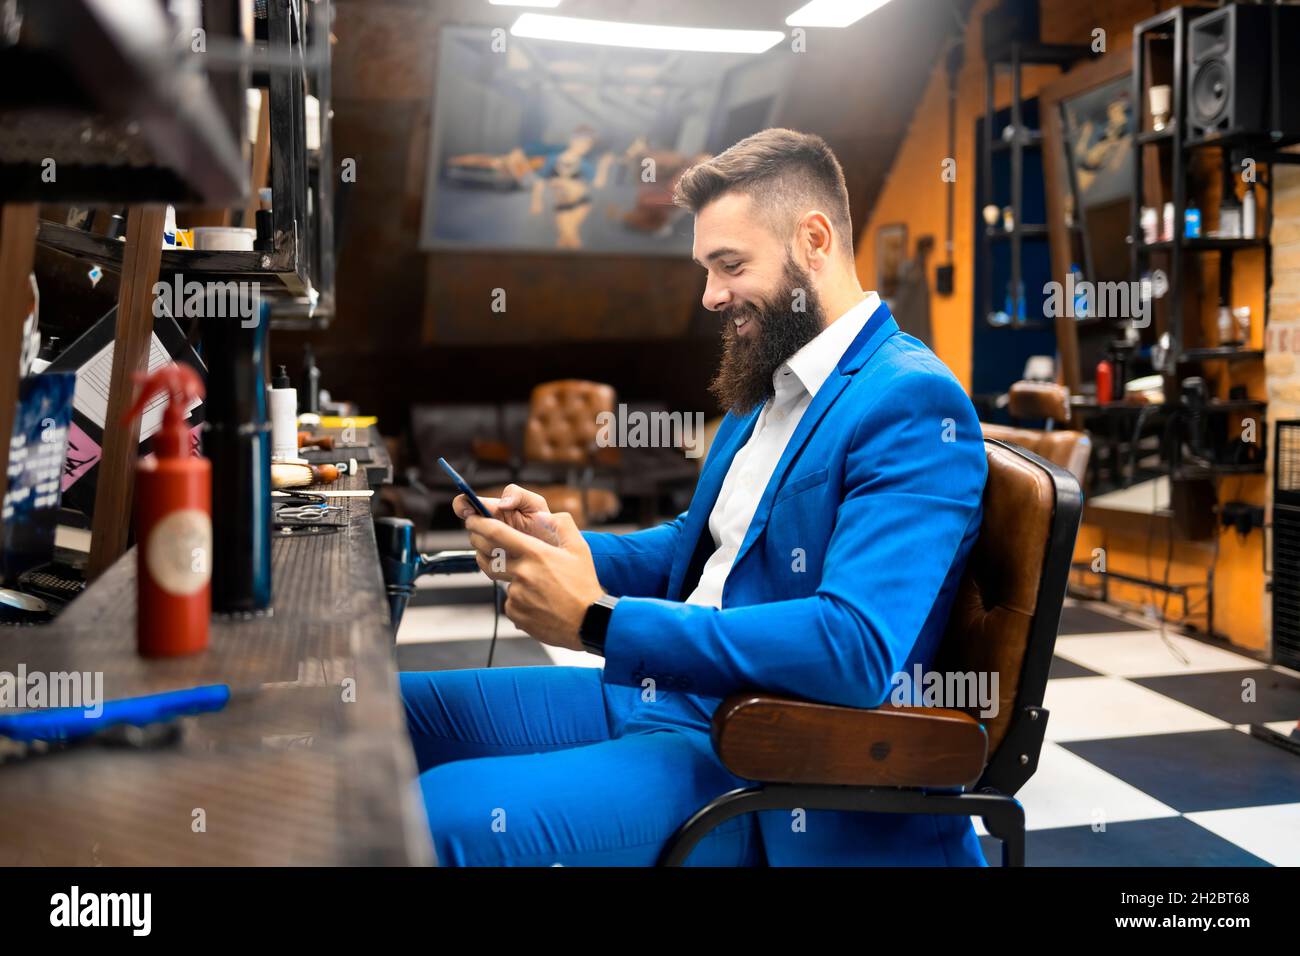 Male businessman in a suit using a smartphone in a hair salon Stock Photo